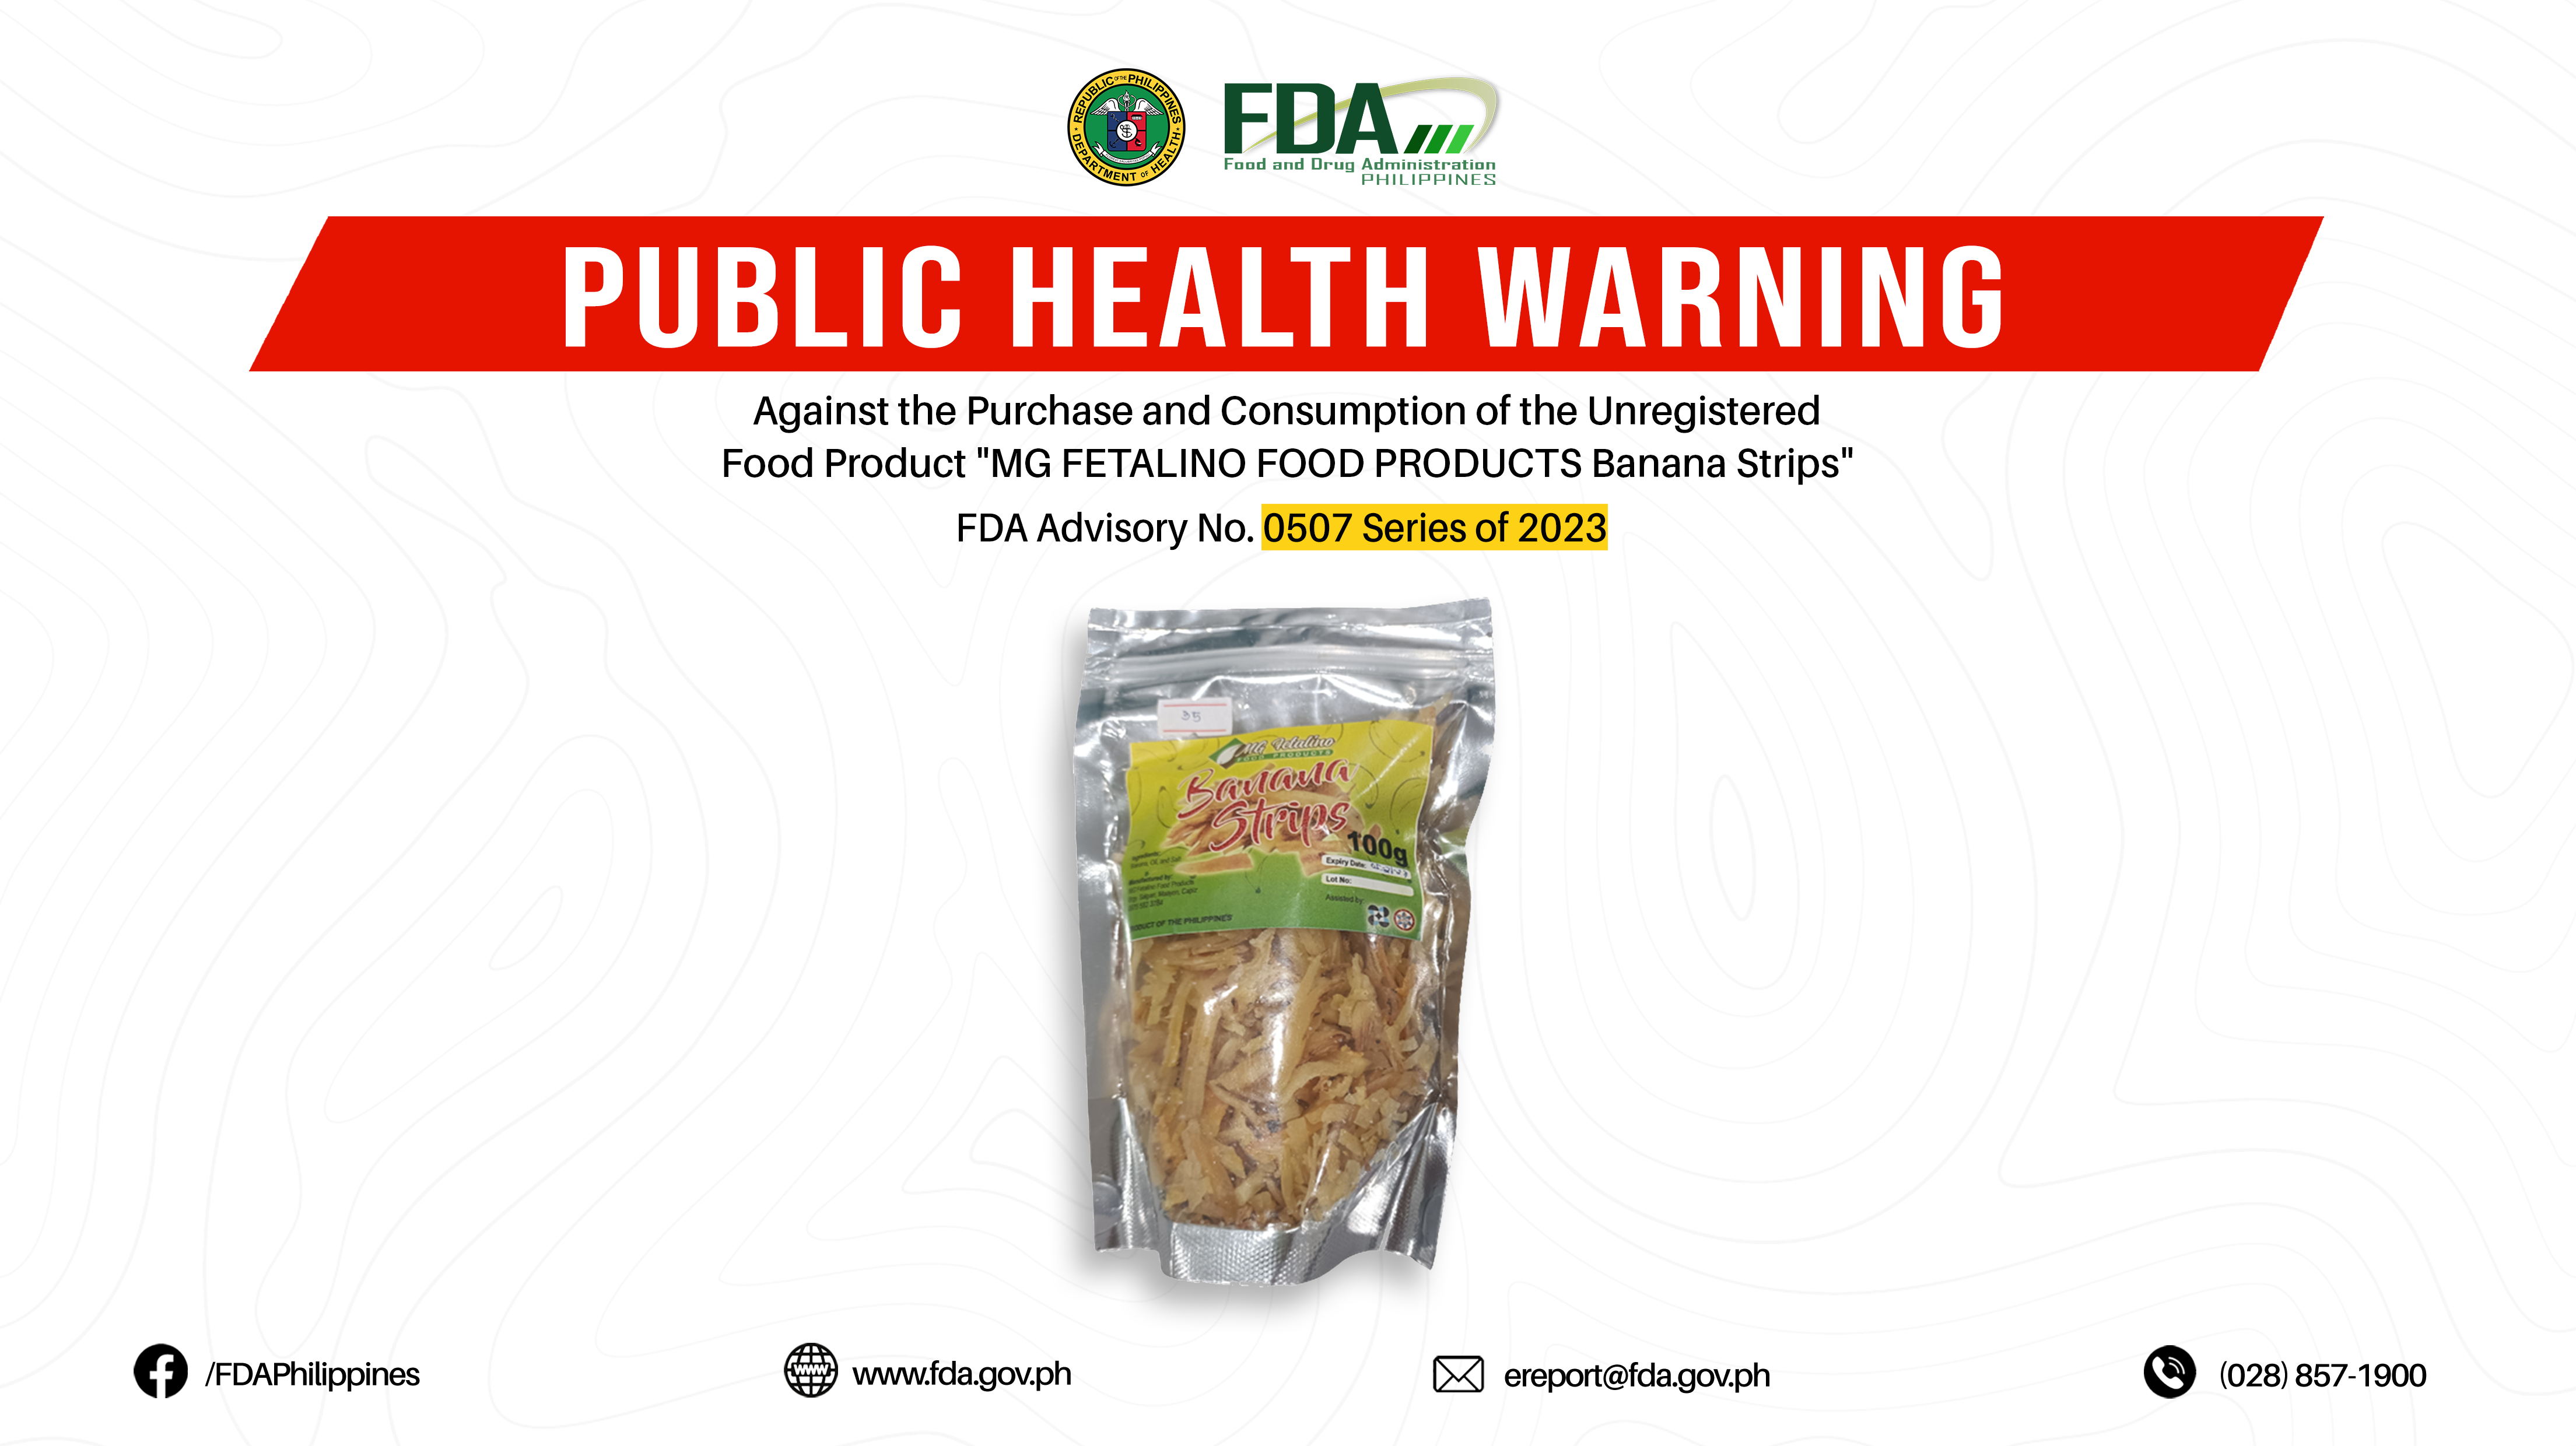 FDA Advisory No.2023-0507 || Public Health Warning Against the Purchase and Consumption of the Unregistered Food Product “MG FETALINO FOOD PRODUCTS Banana Strips”